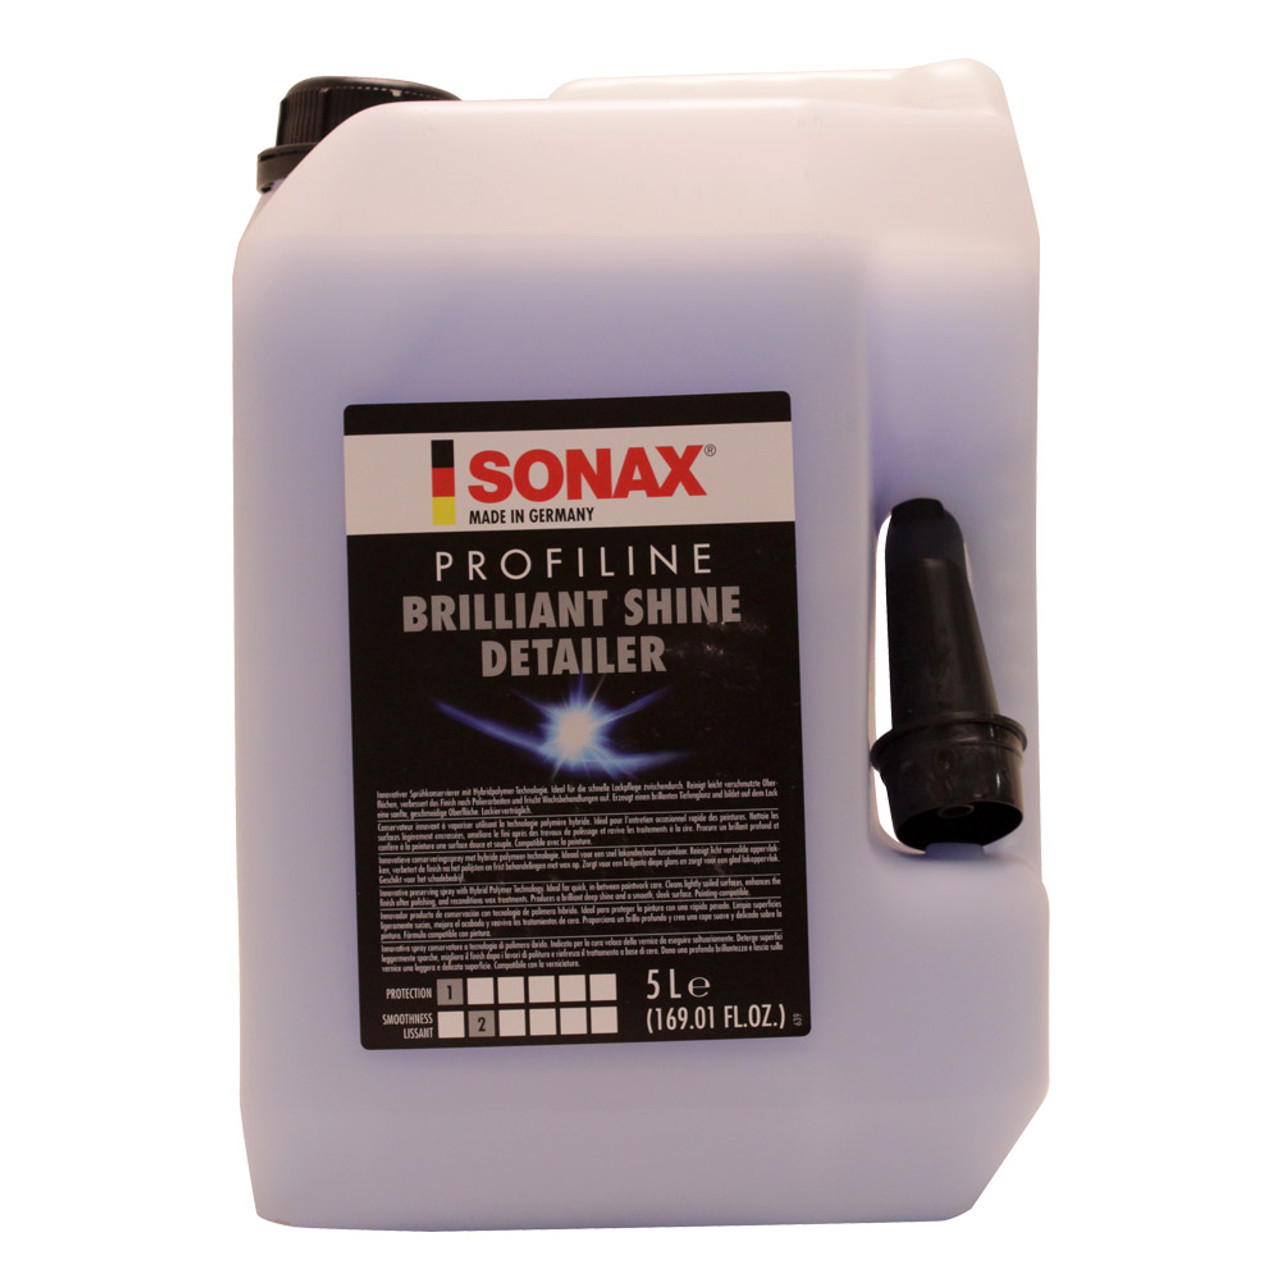 SONAX Authorized Detailer - The boost for your business